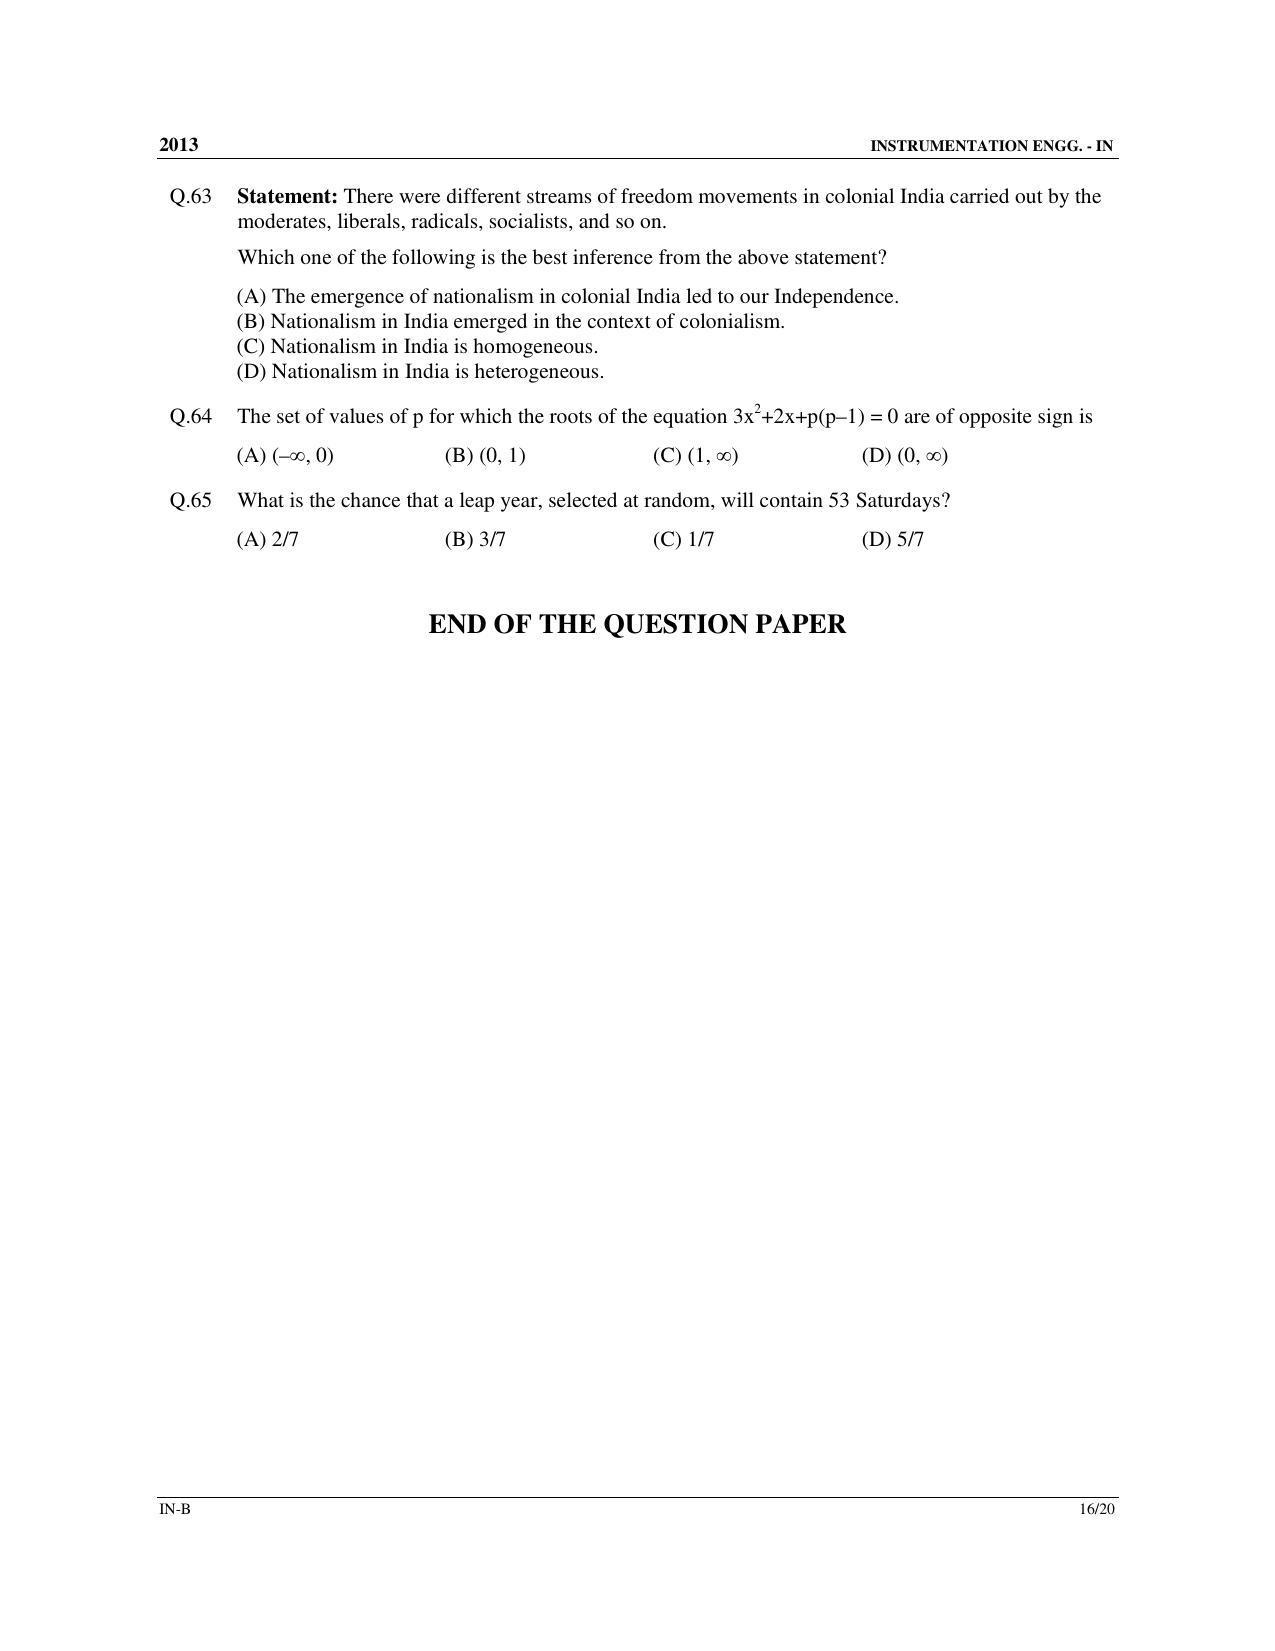 GATE 2013 Instrumentation Engineering (IN) Question Paper with Answer Key - Page 34